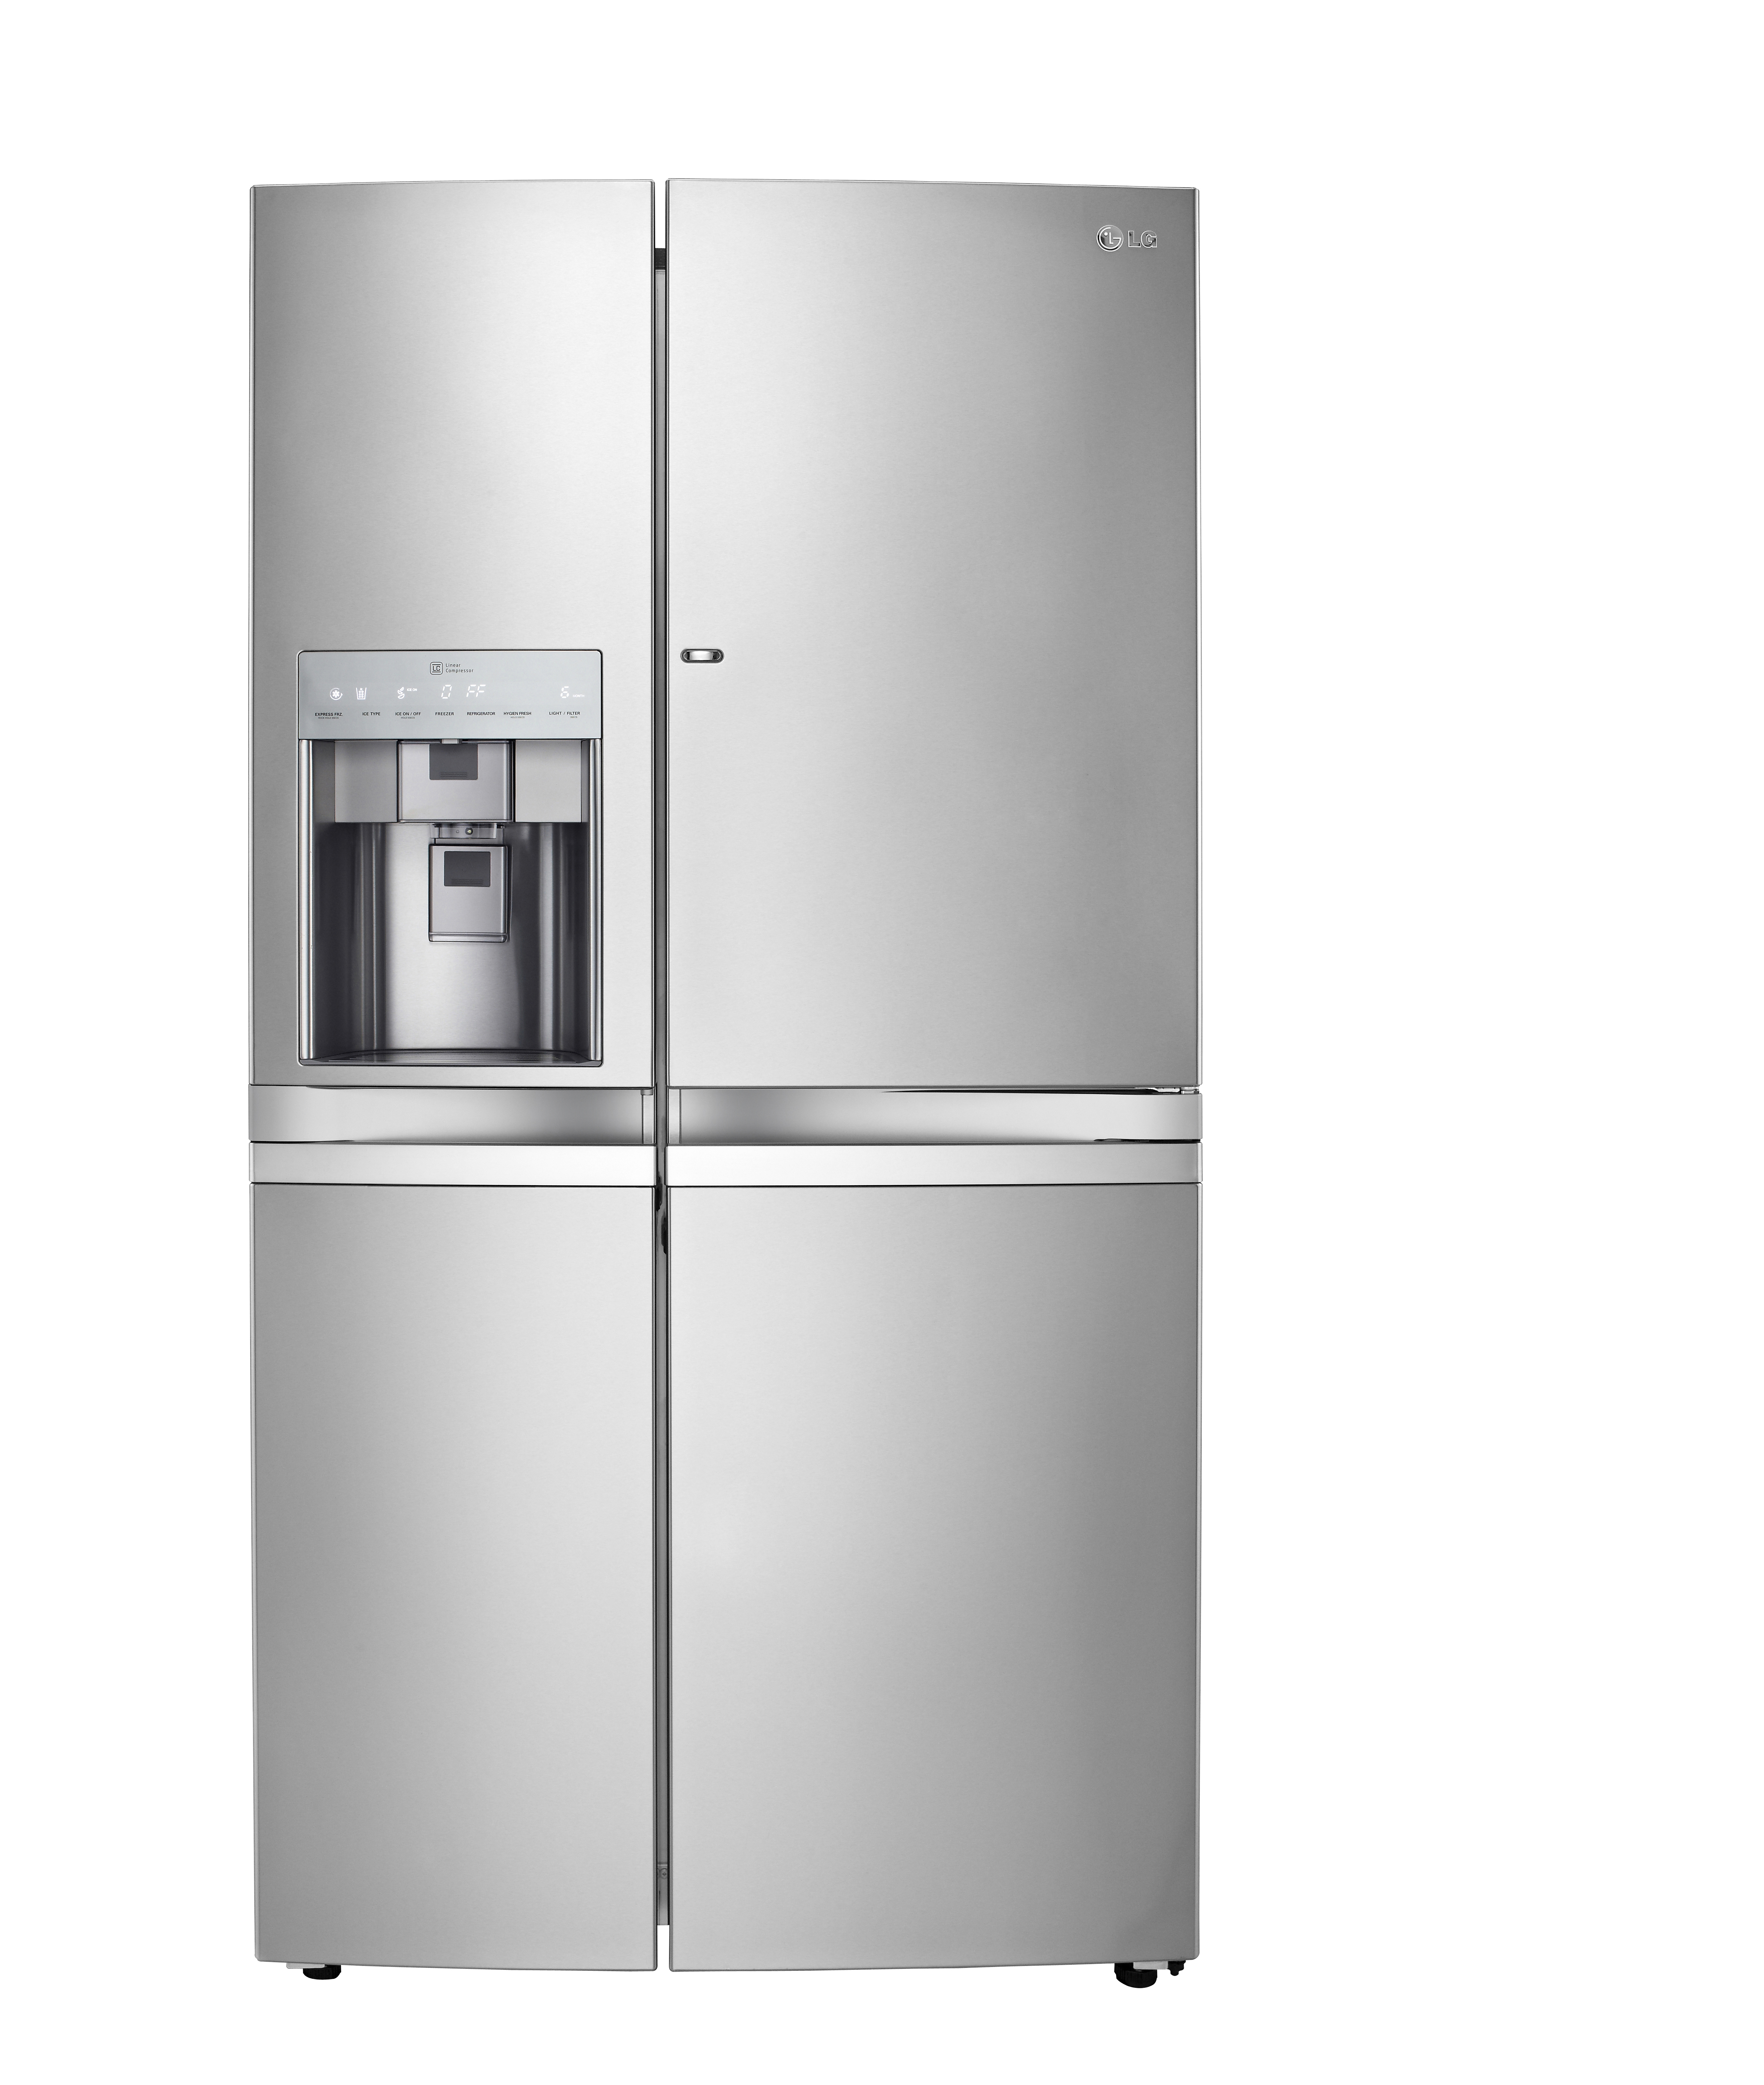 Front view of LG’s side-by-side refrigerator